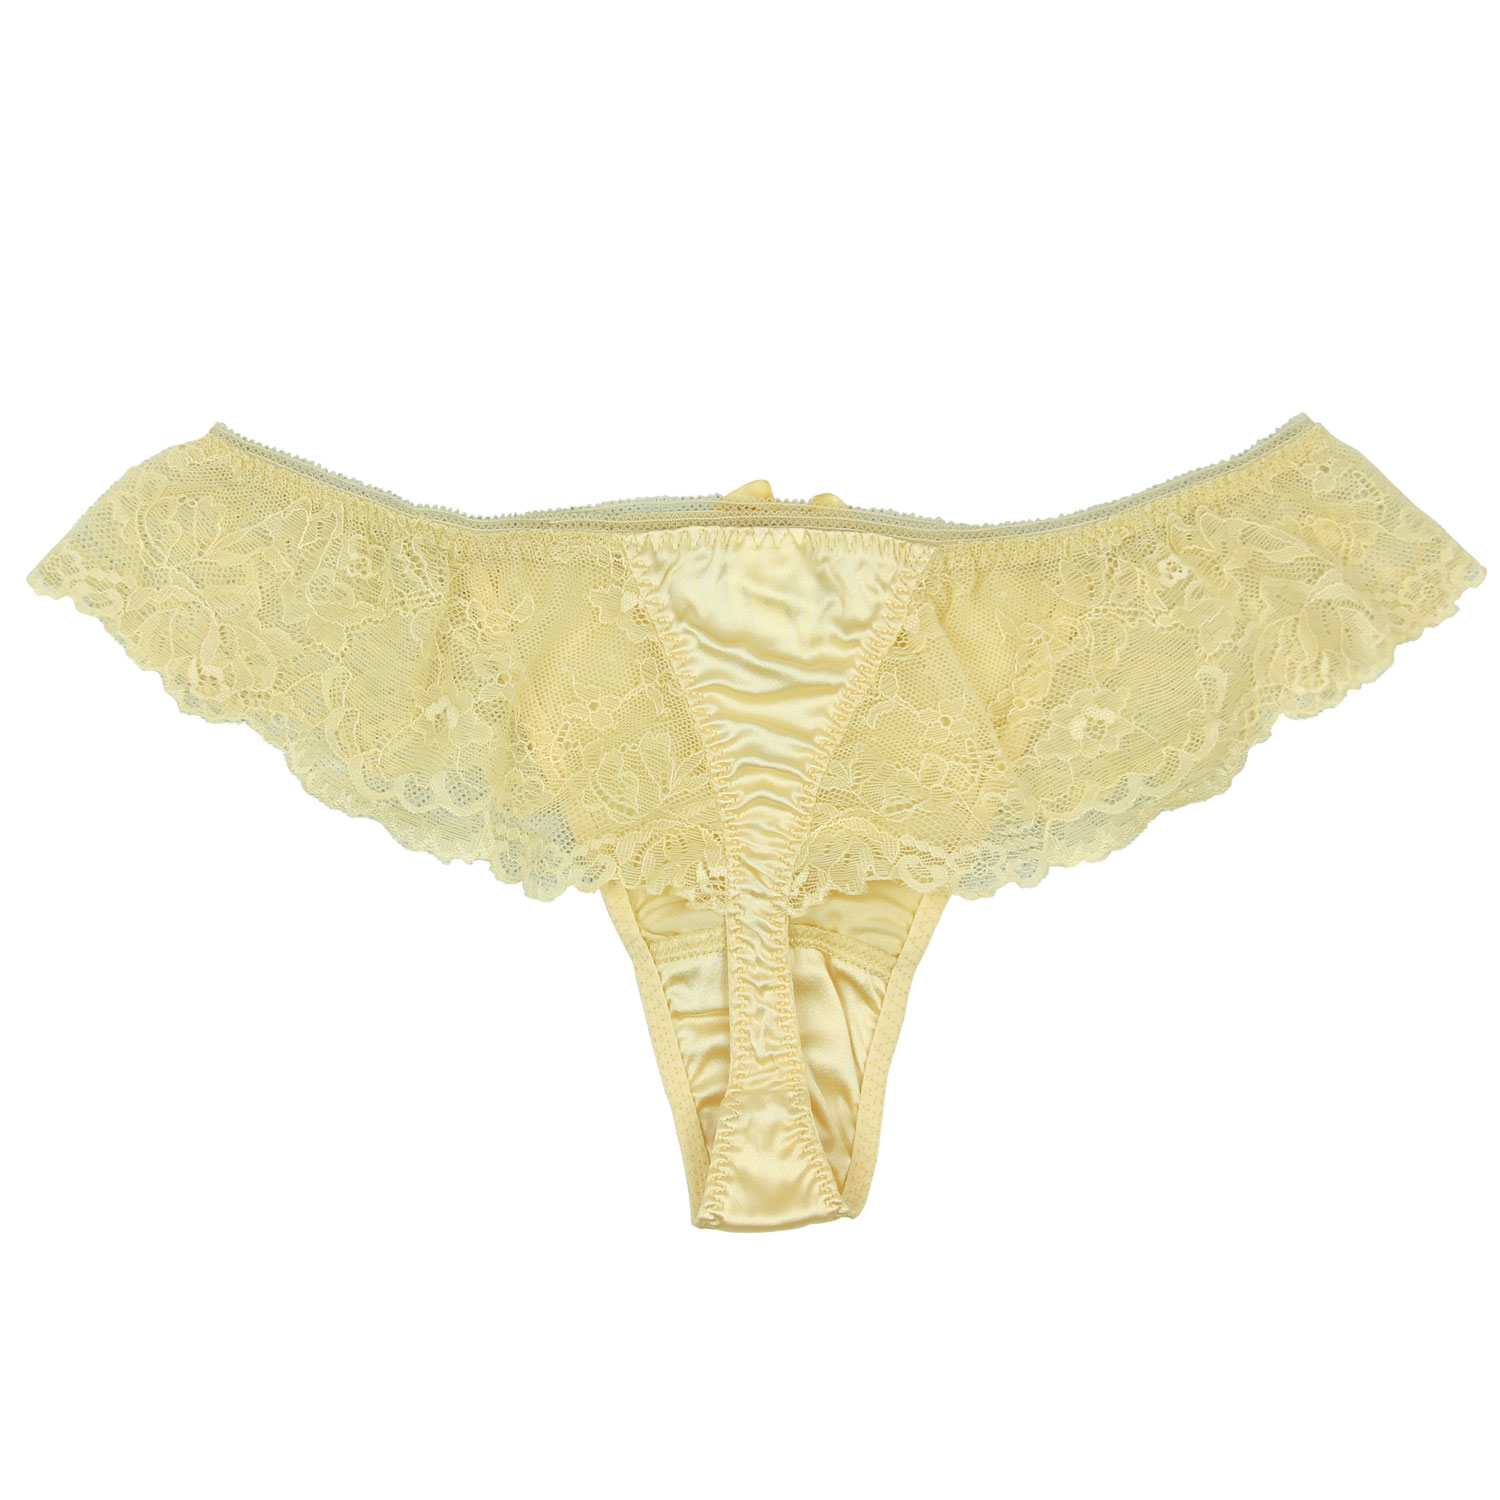 Women's Sexy Lace Thong Panties 93% Silk Blend Comfortable Lingerie ...